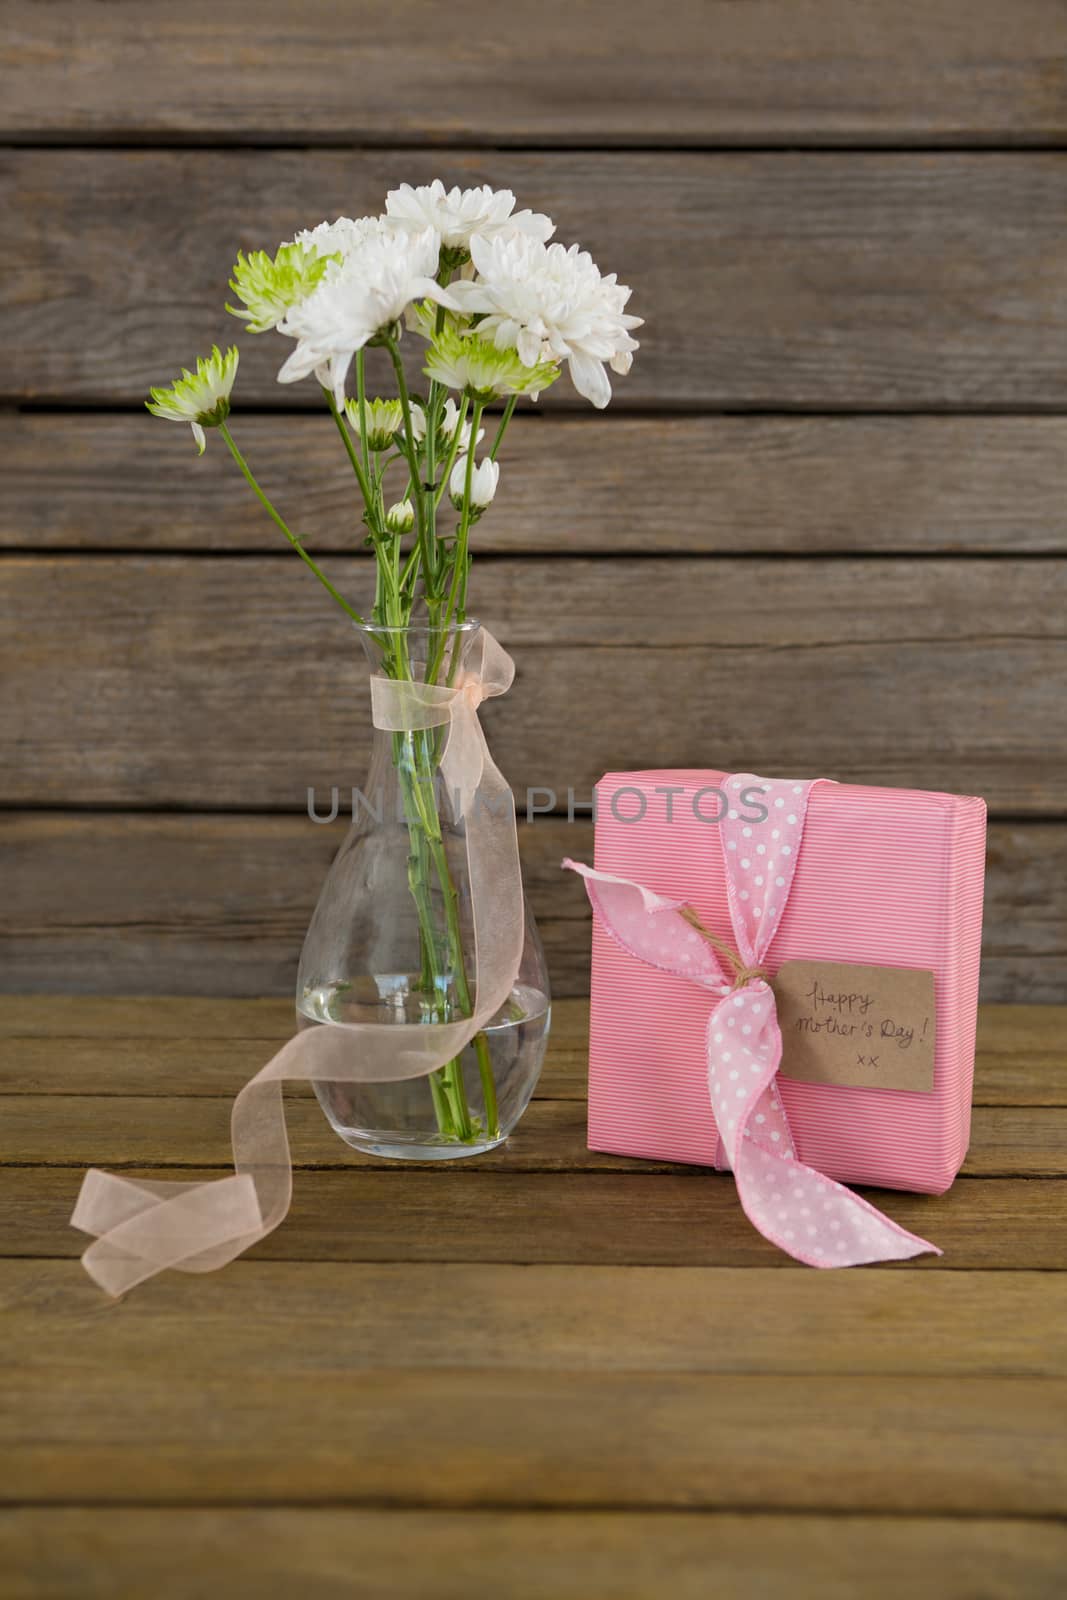 Gift box and flower vase on wooden surface by Wavebreakmedia